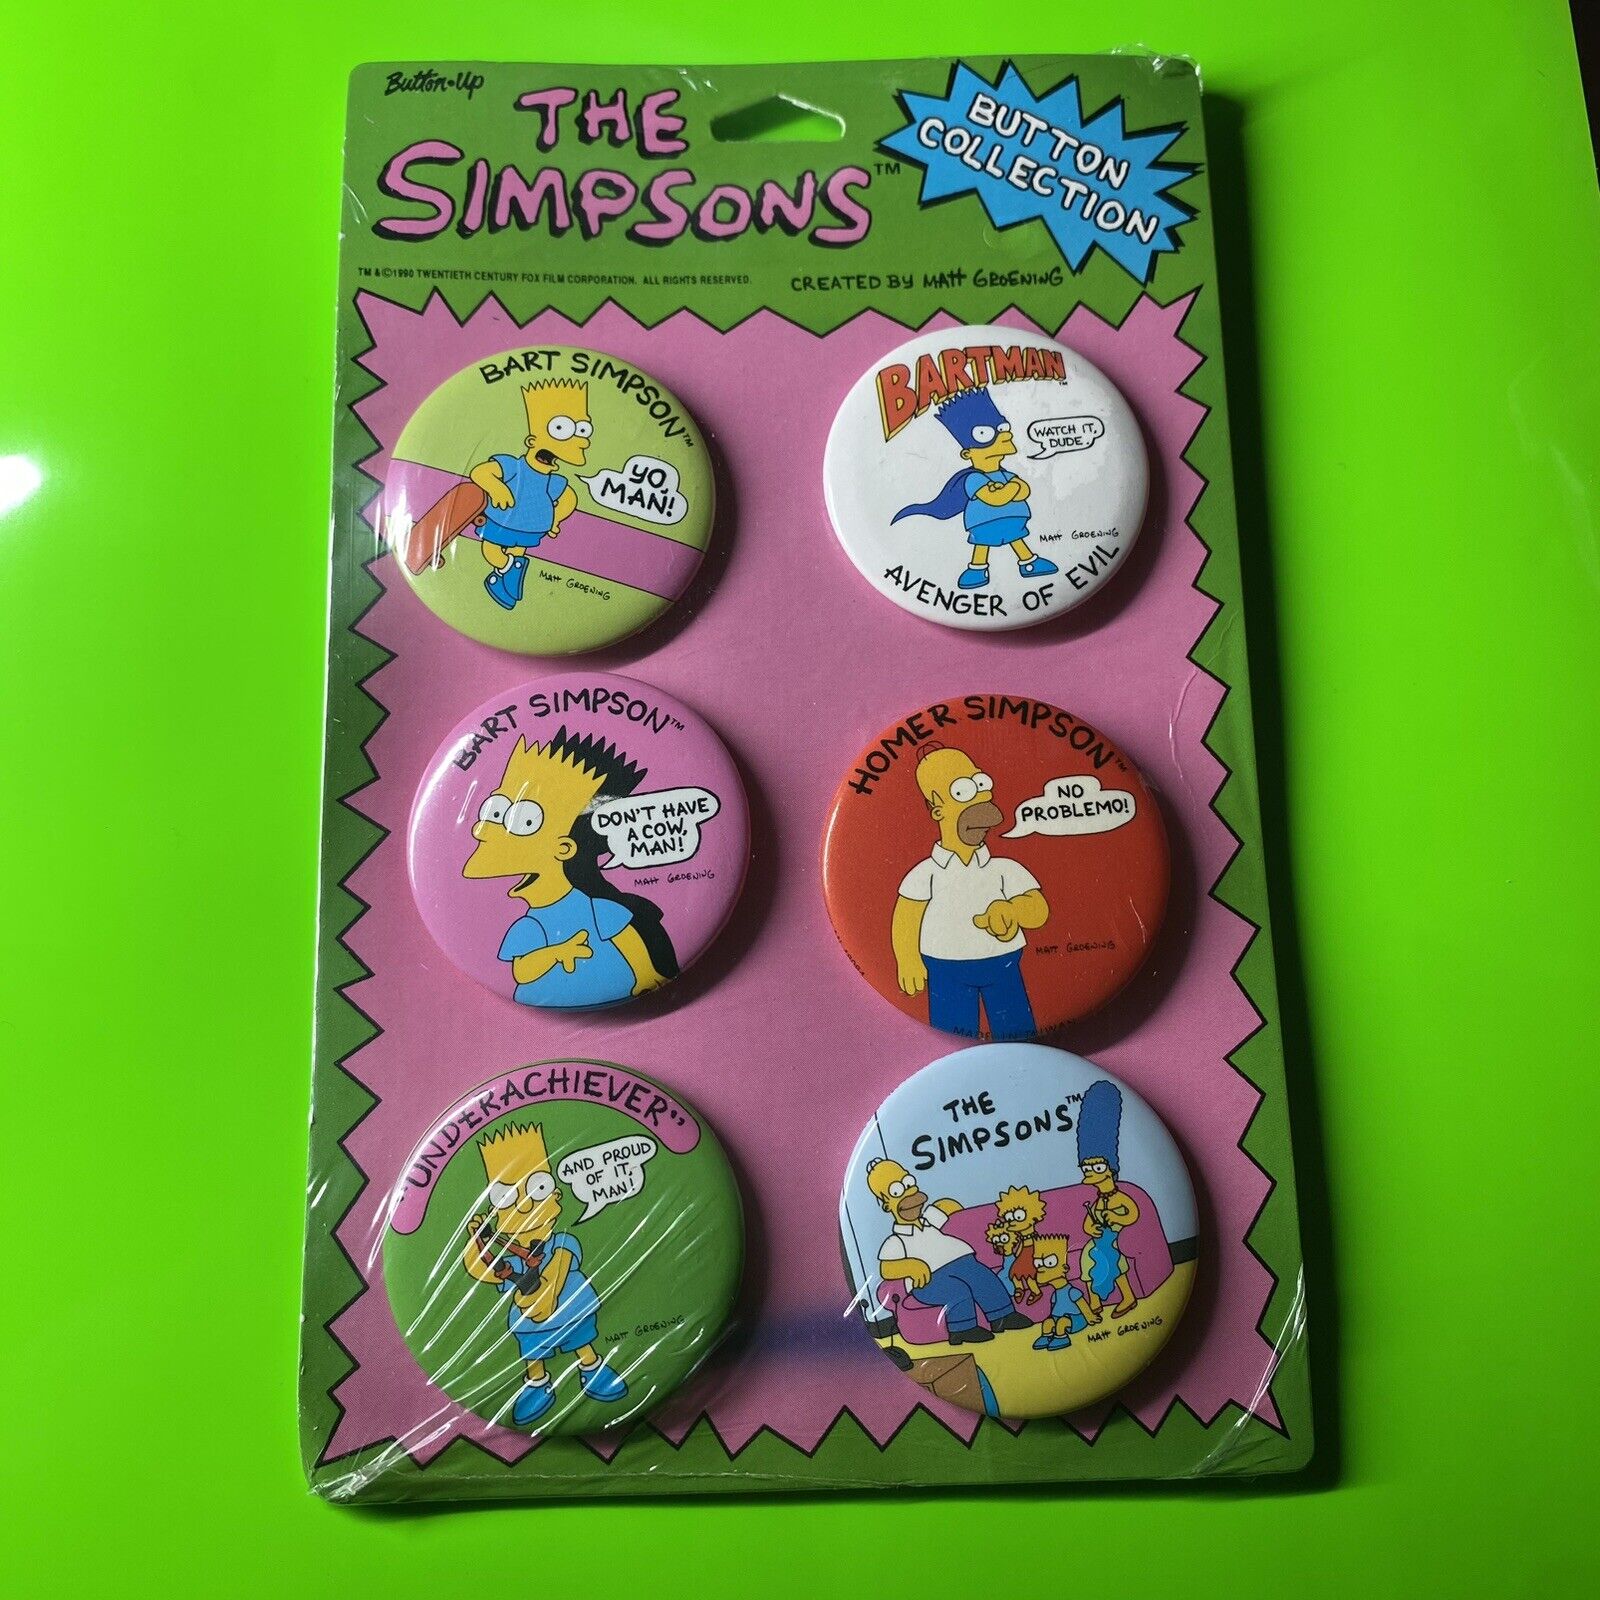 Vintage The Simpsons Pinback Button Collection - 6 Pins Sealed (Bart Homer TV)